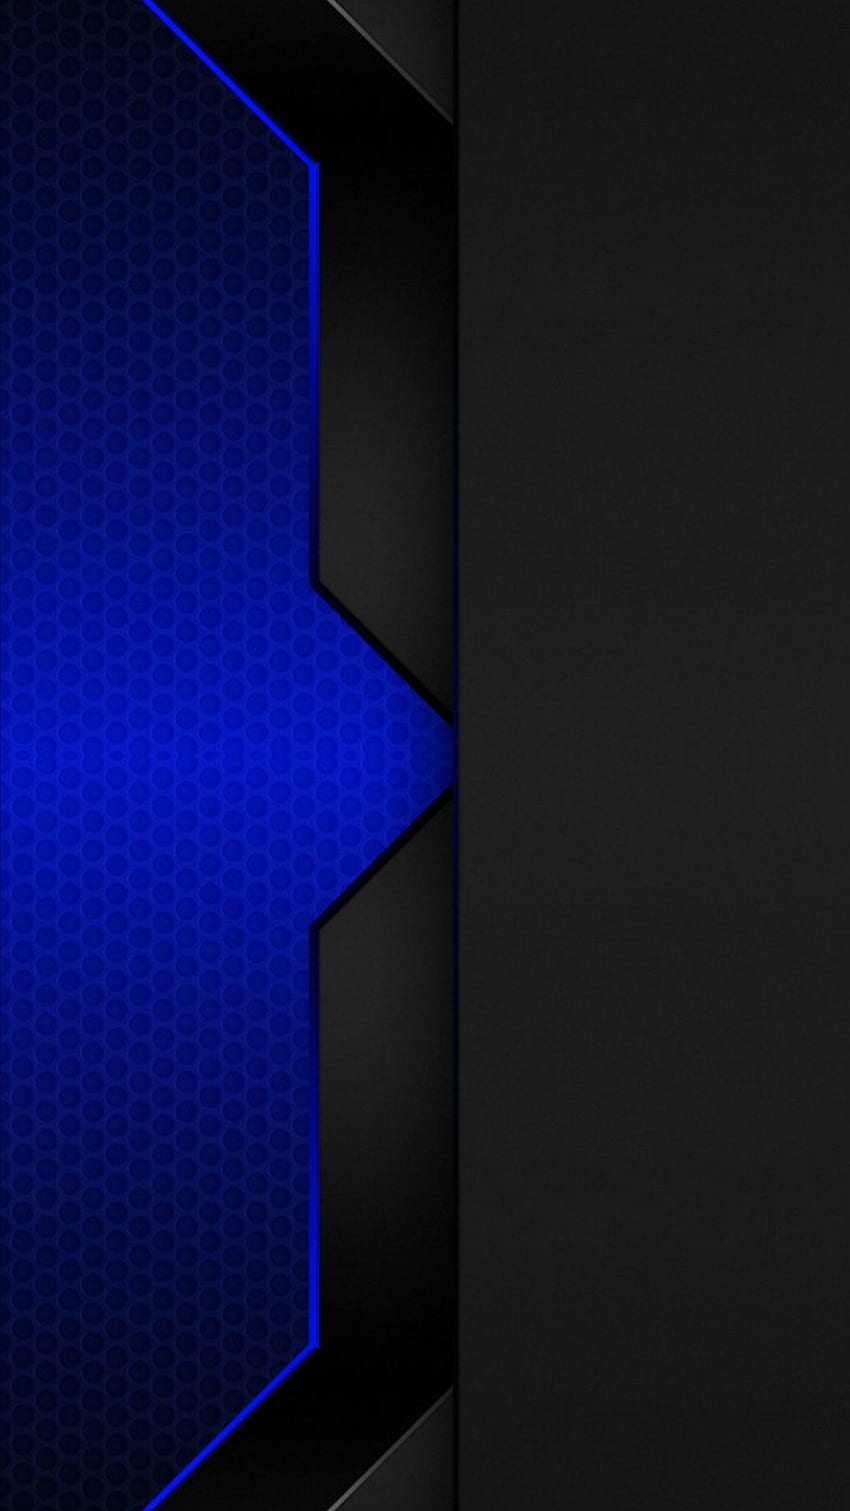 fdsgfjjl, shadow, bright, oled, pattern, 3d, amoled, modern, design, dark, layers, gamer, overlayed, mesh, digital, tech, electric blue, new, neon, texture, abstract, fixture, material, corporate, future, , shiny, , overlapped HD phone wallpaper